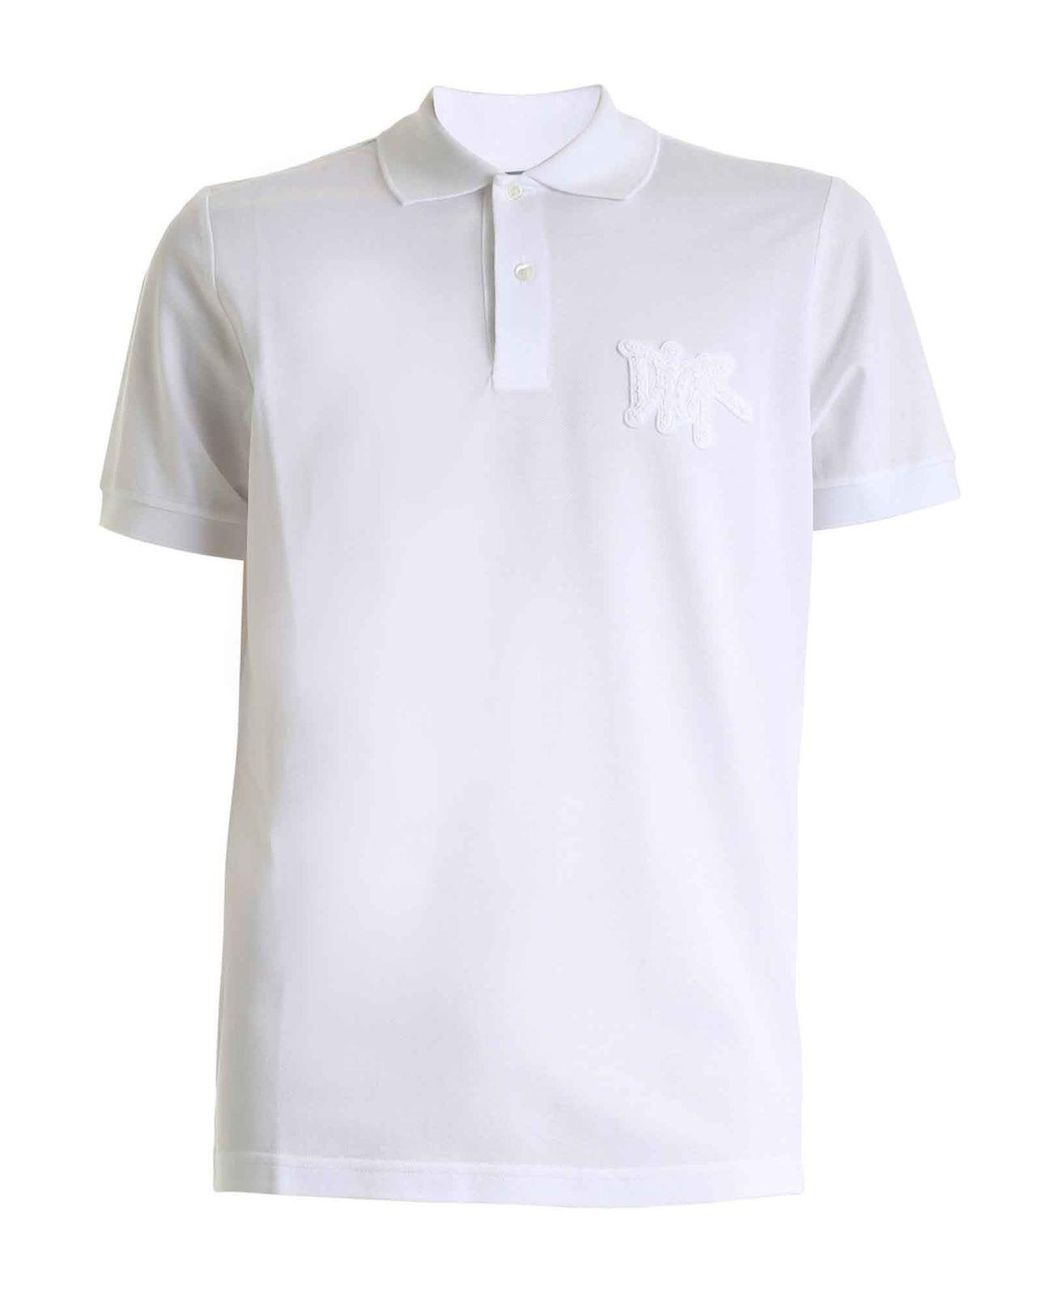 Dior Cotton And Shawn Polo Shirt In White for Men - Lyst